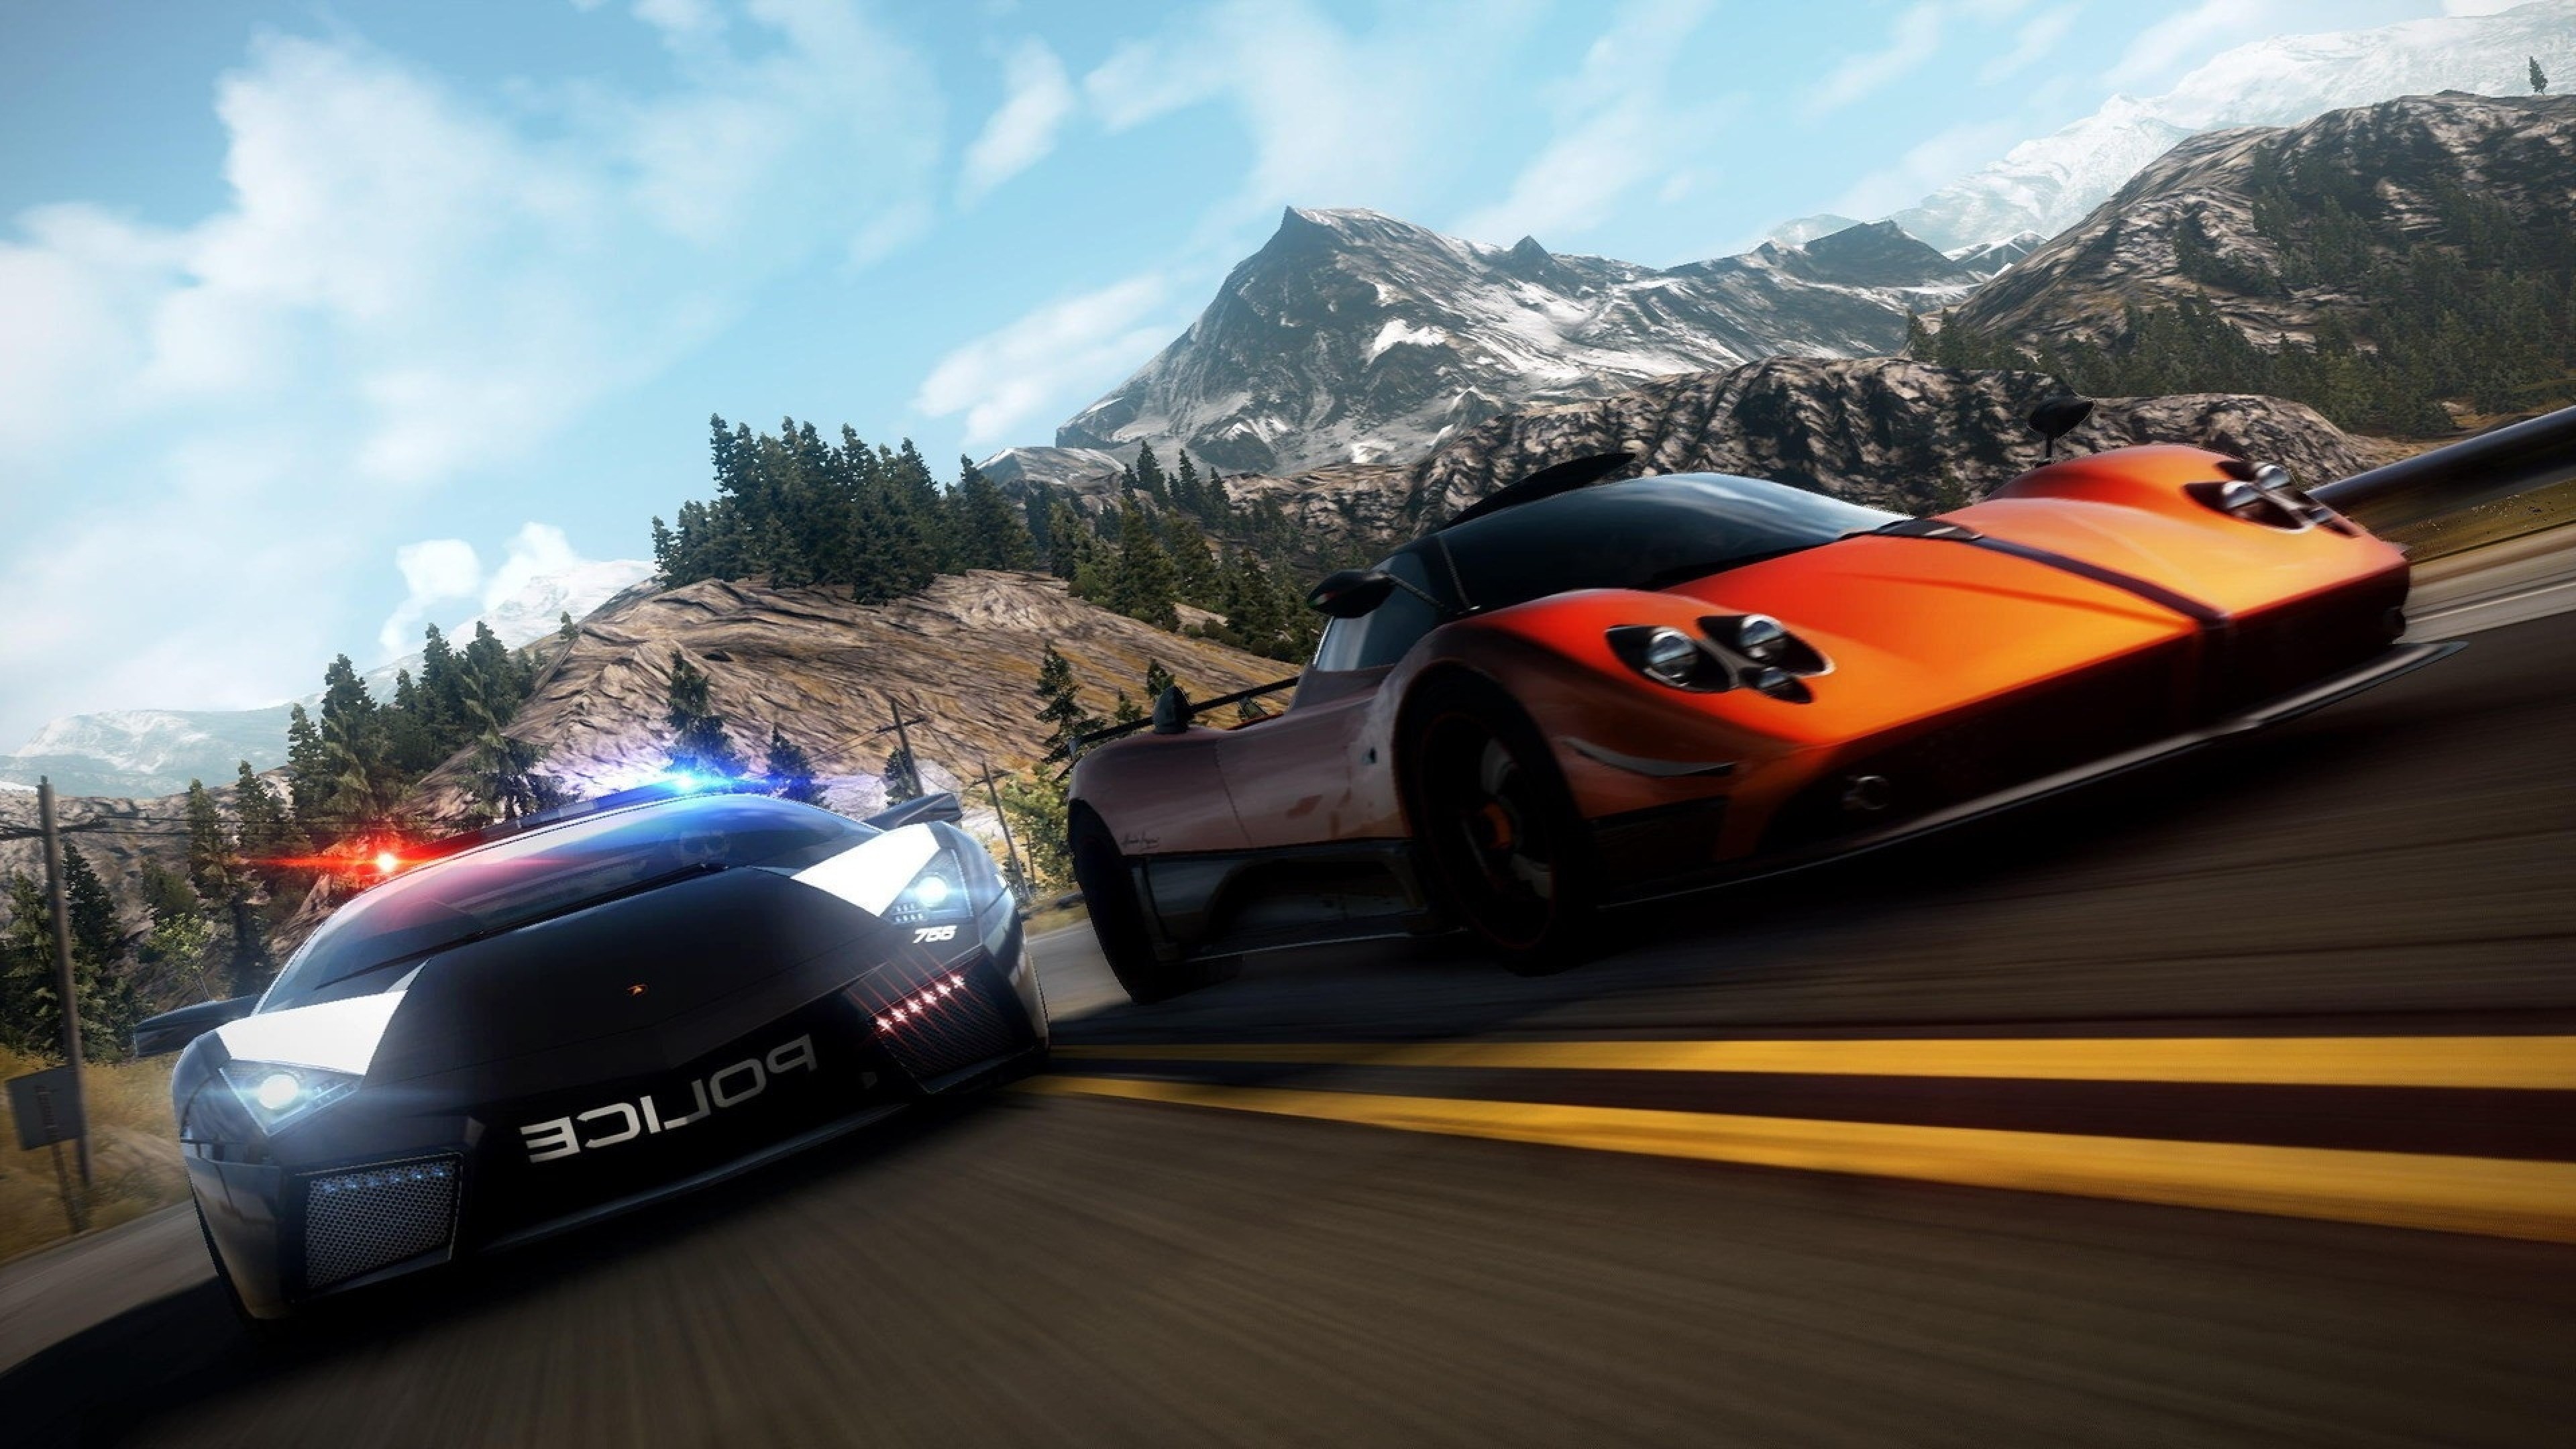 3840x2160  Wallpaper nfs, need for speed, police, road, mountain, sky